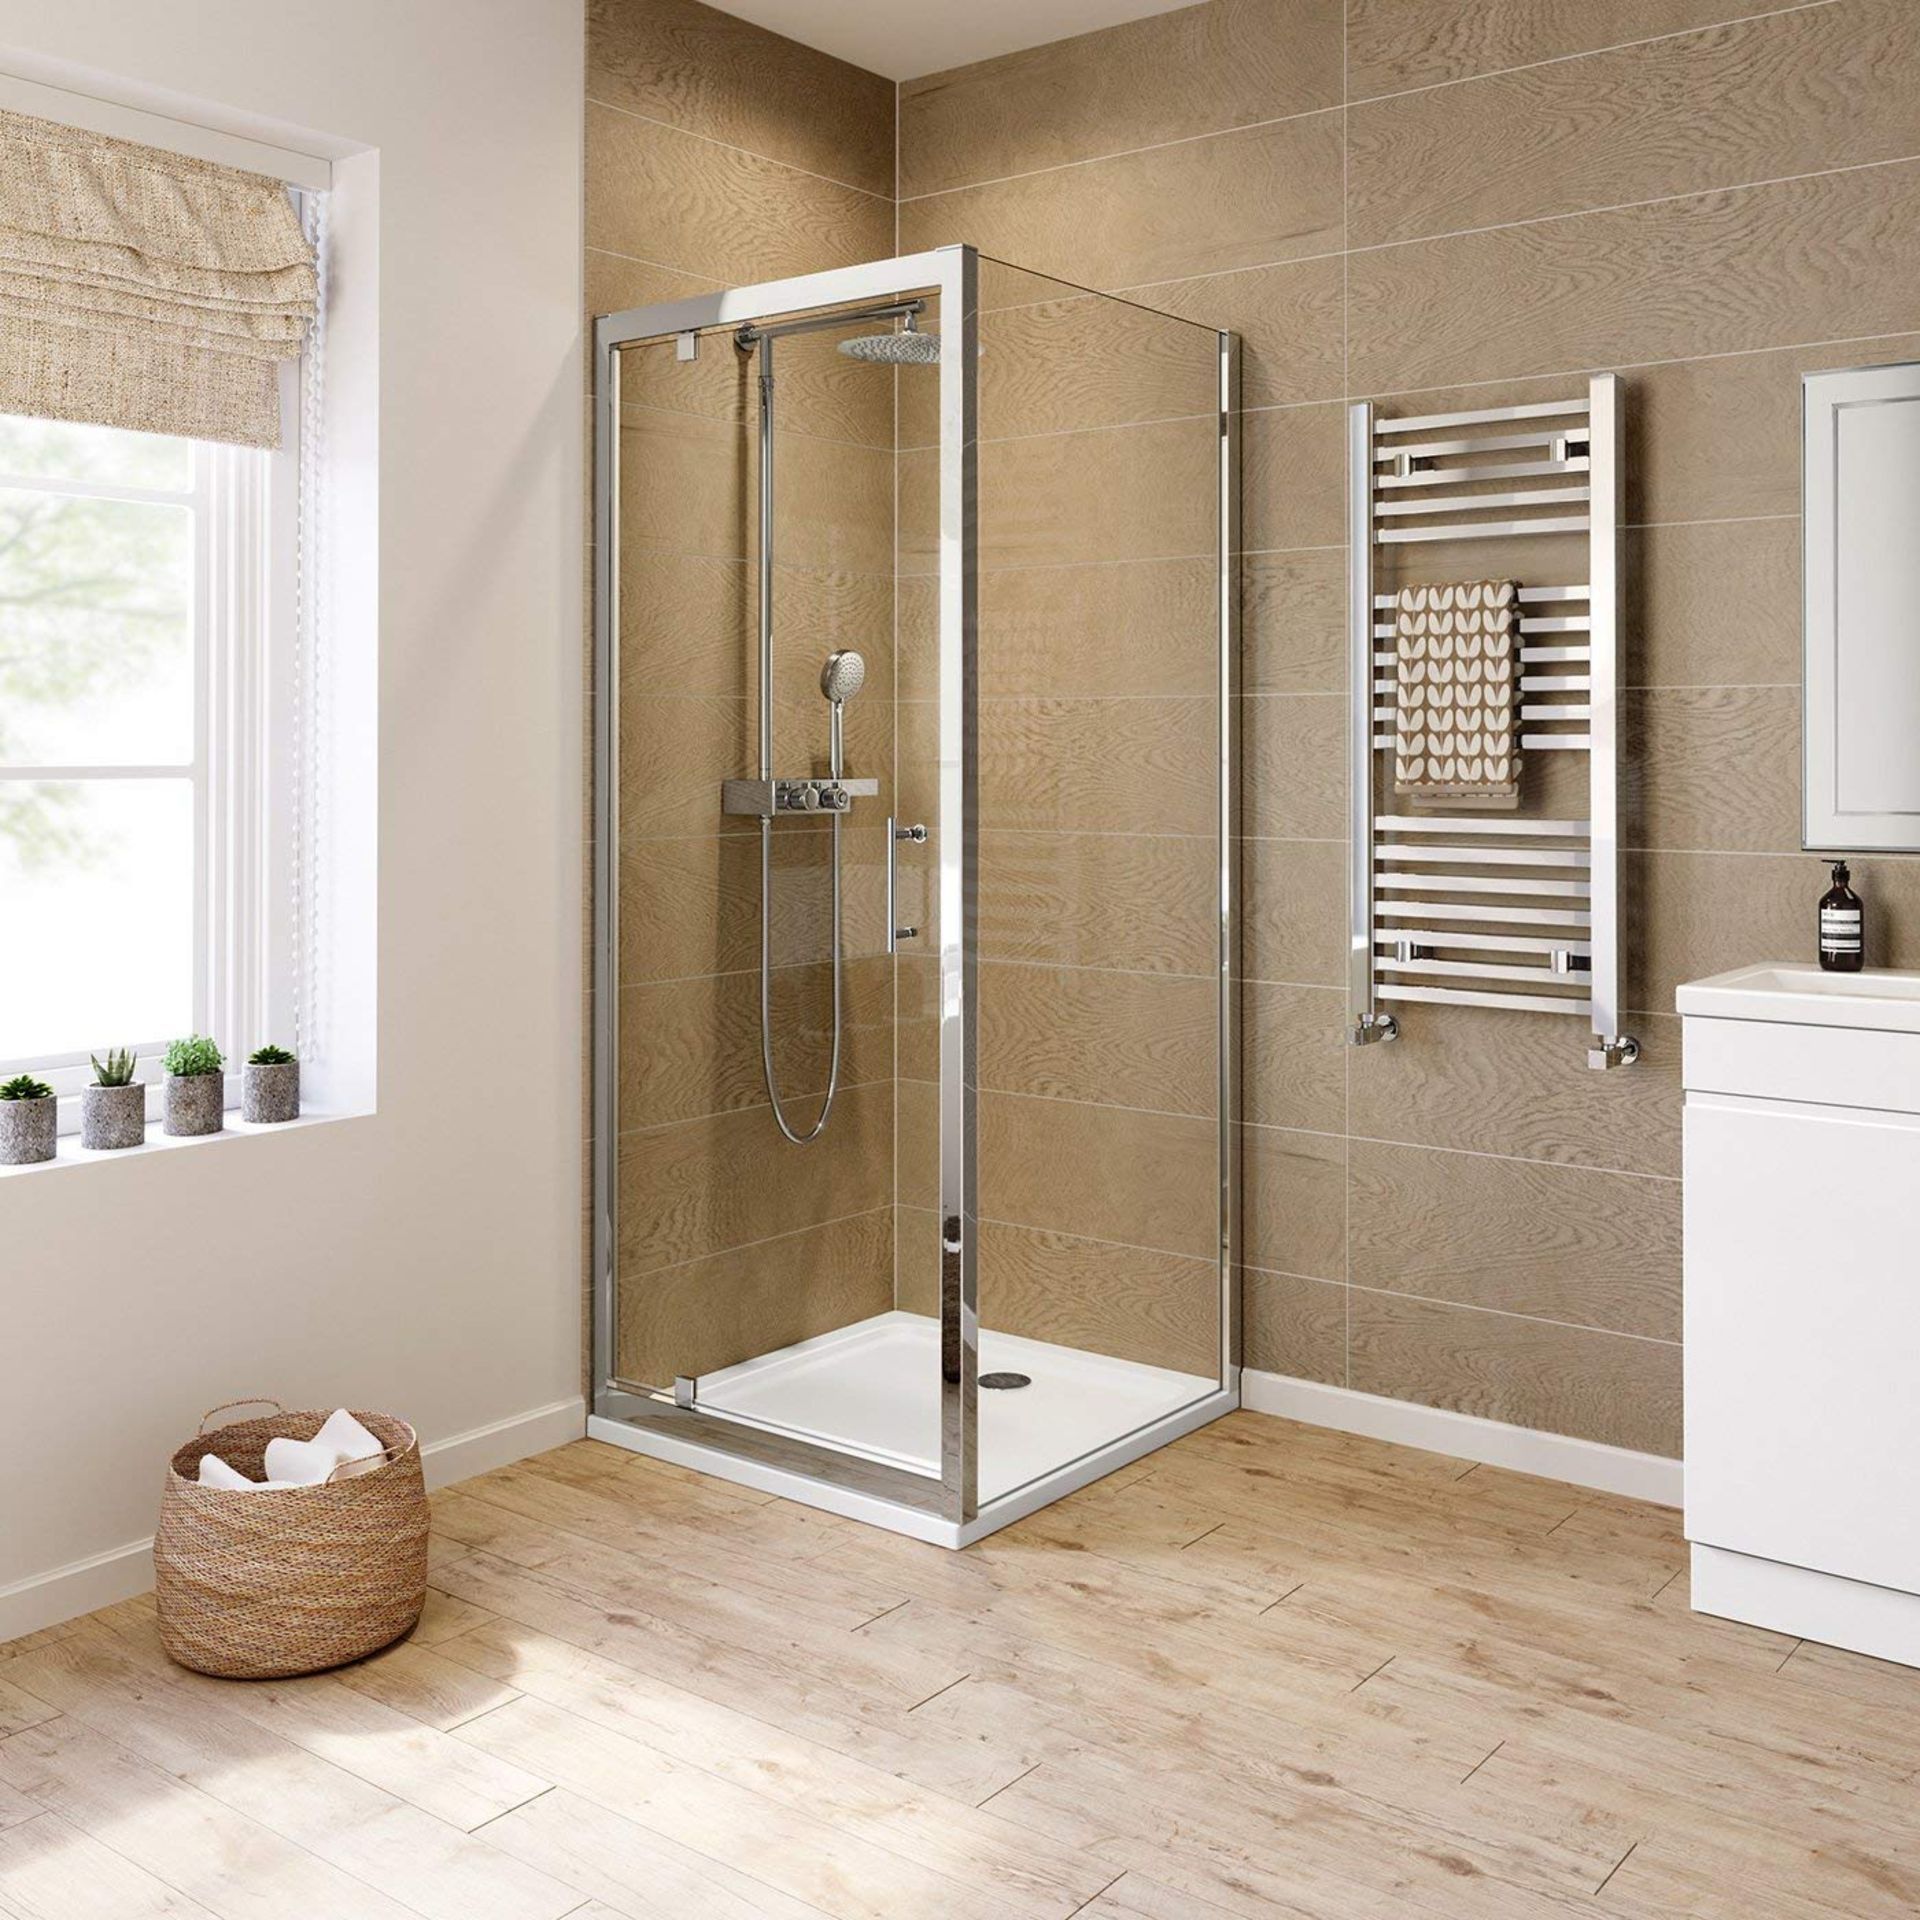 Twyfords 700x700 Pivot Hinged 8mm Glass Shower Enclosure Reversible Door + Side Panel.RRP £349... - Image 2 of 2